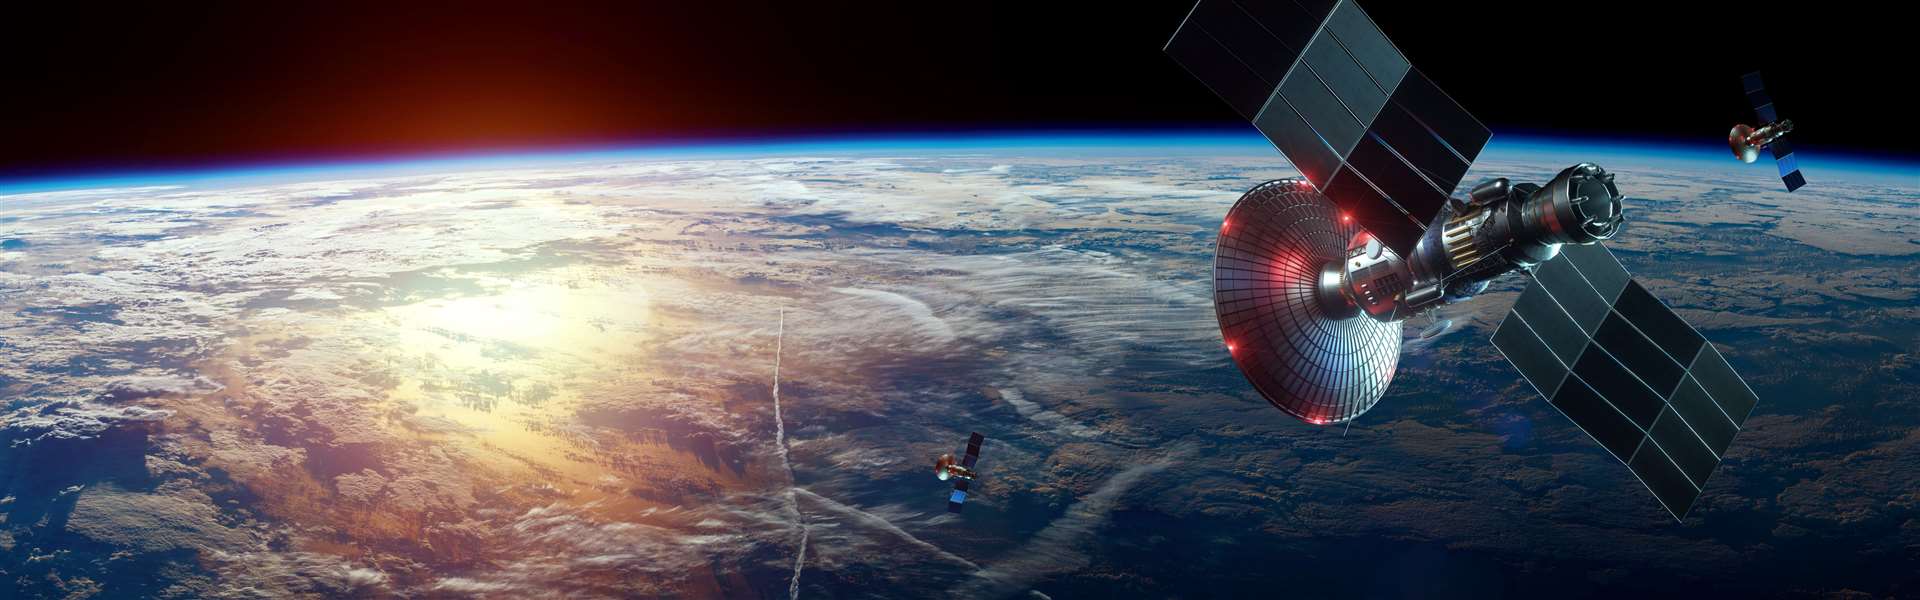 A satellite in space with Earth in the background. Stock Image